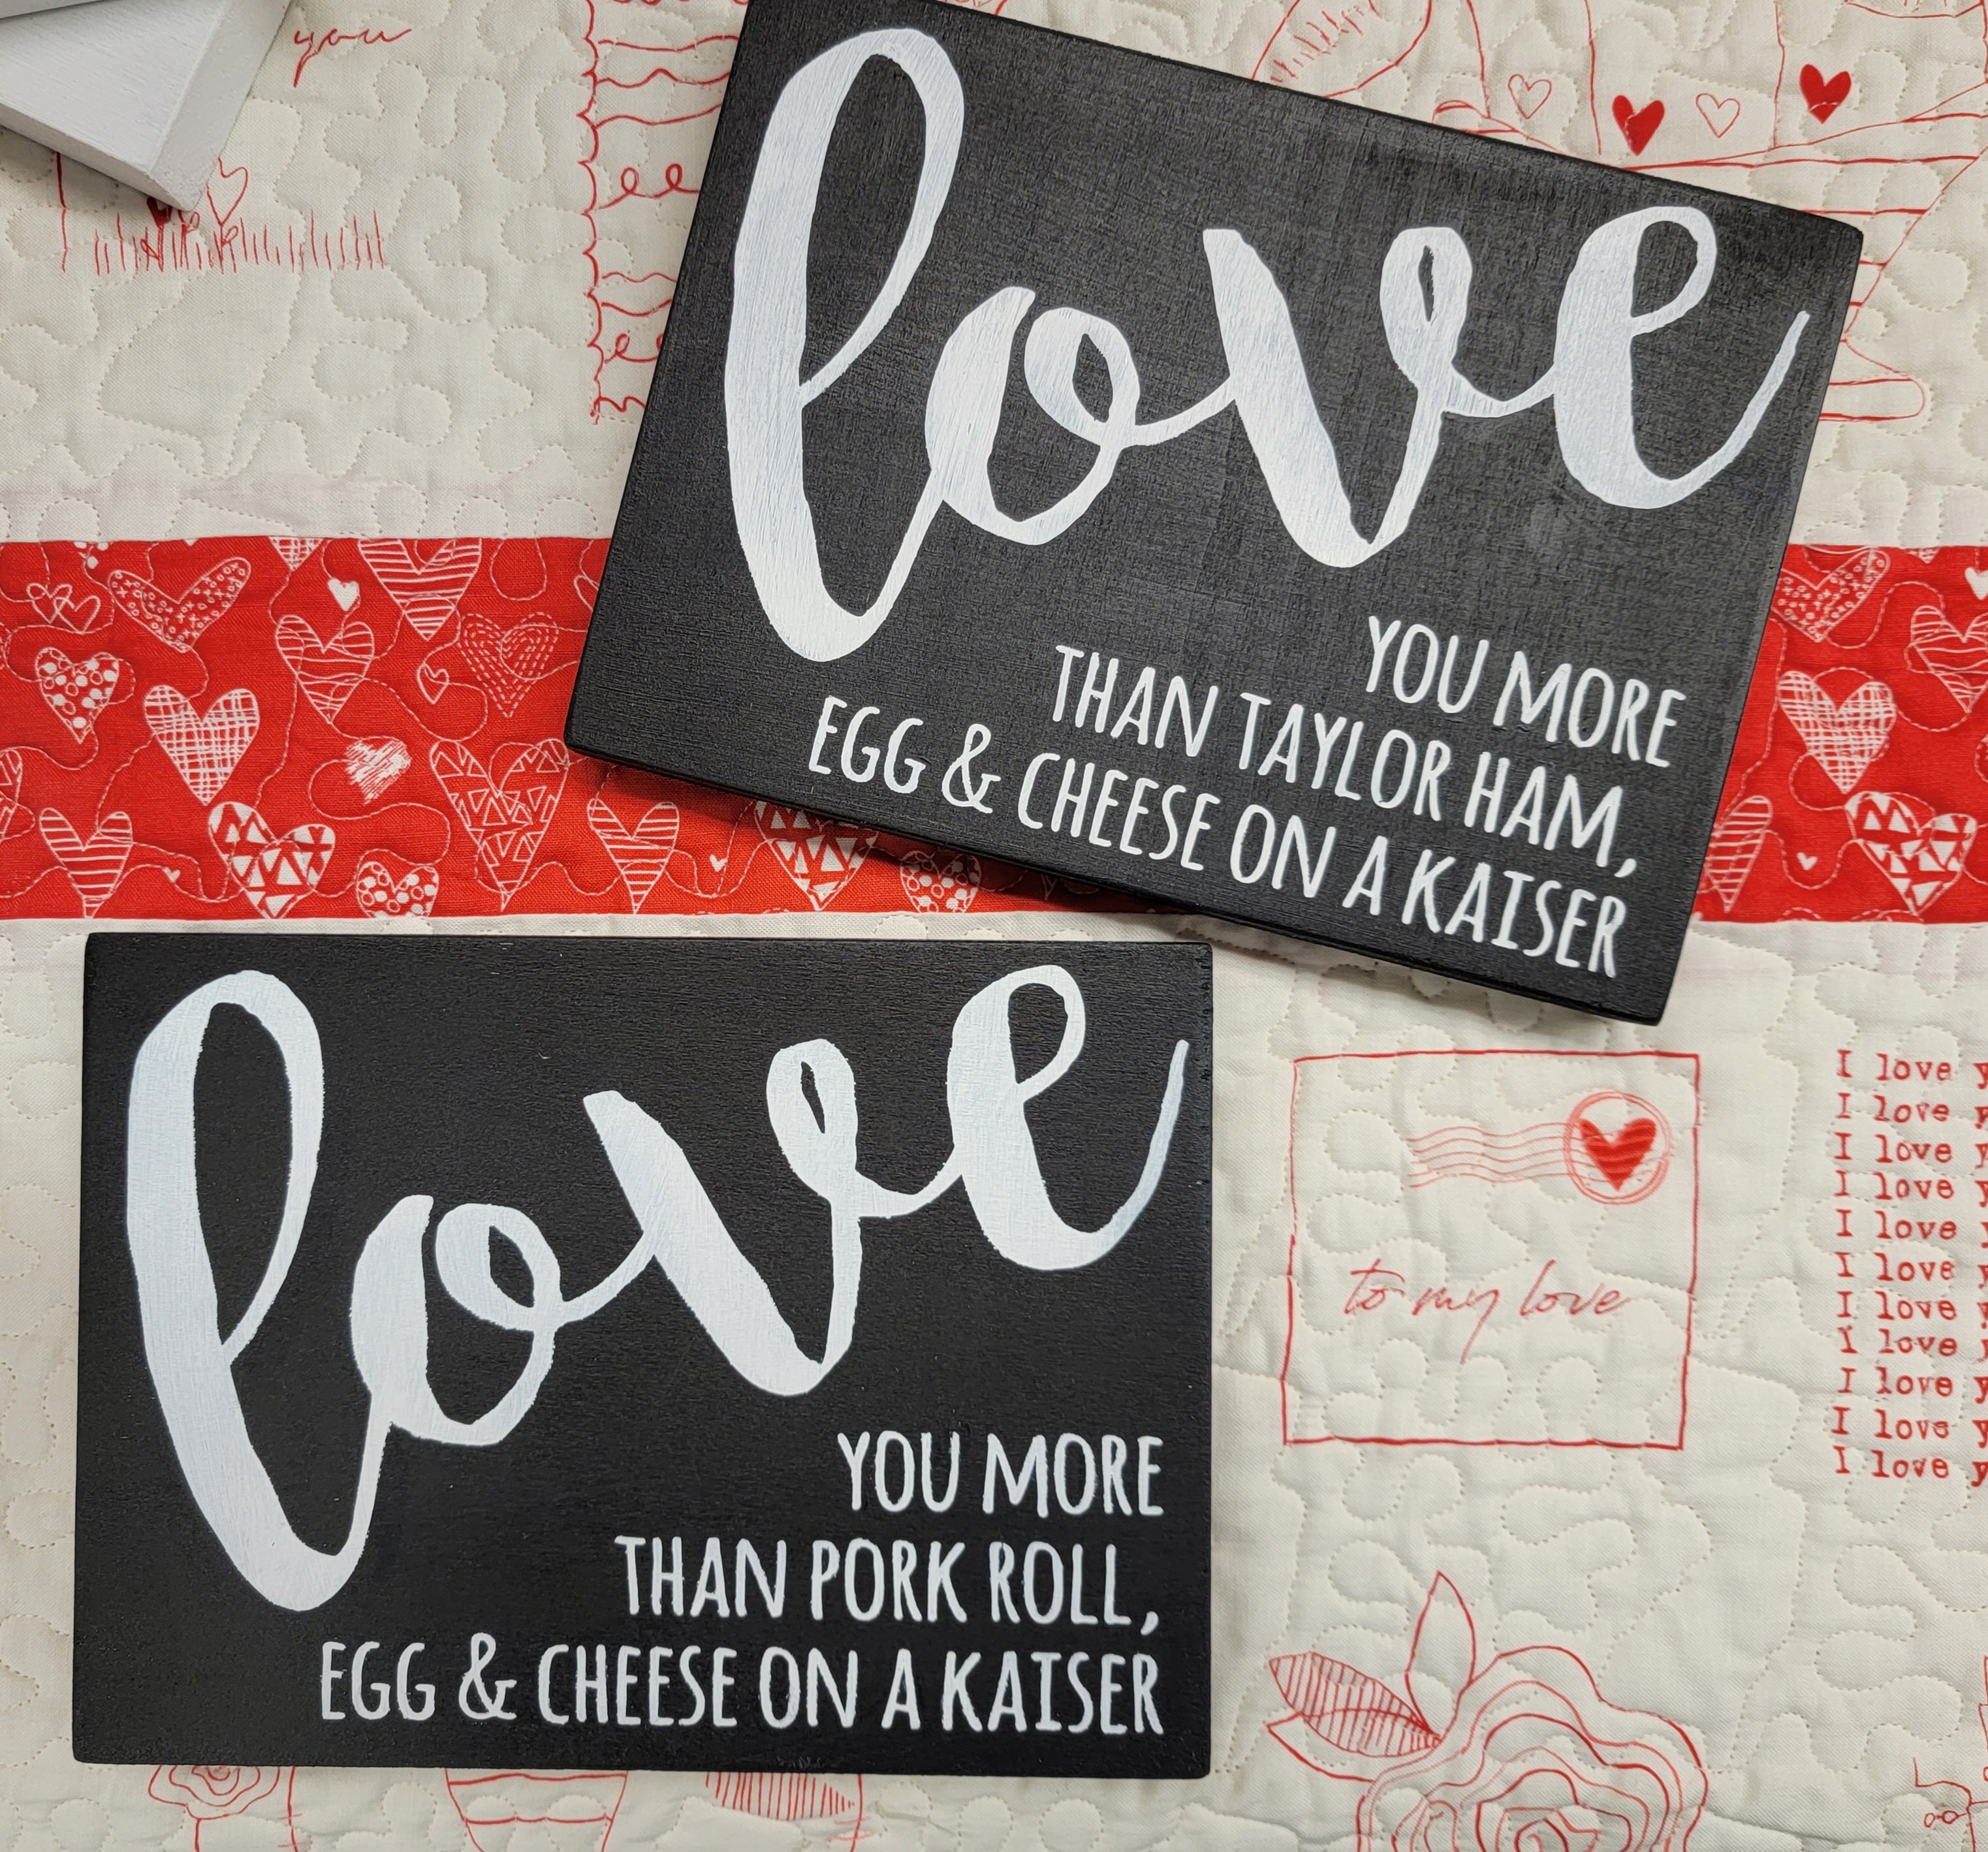 Love you more than Pork Roll/Taylor Ham, 7.5&quot; x 5.5&quot; sign